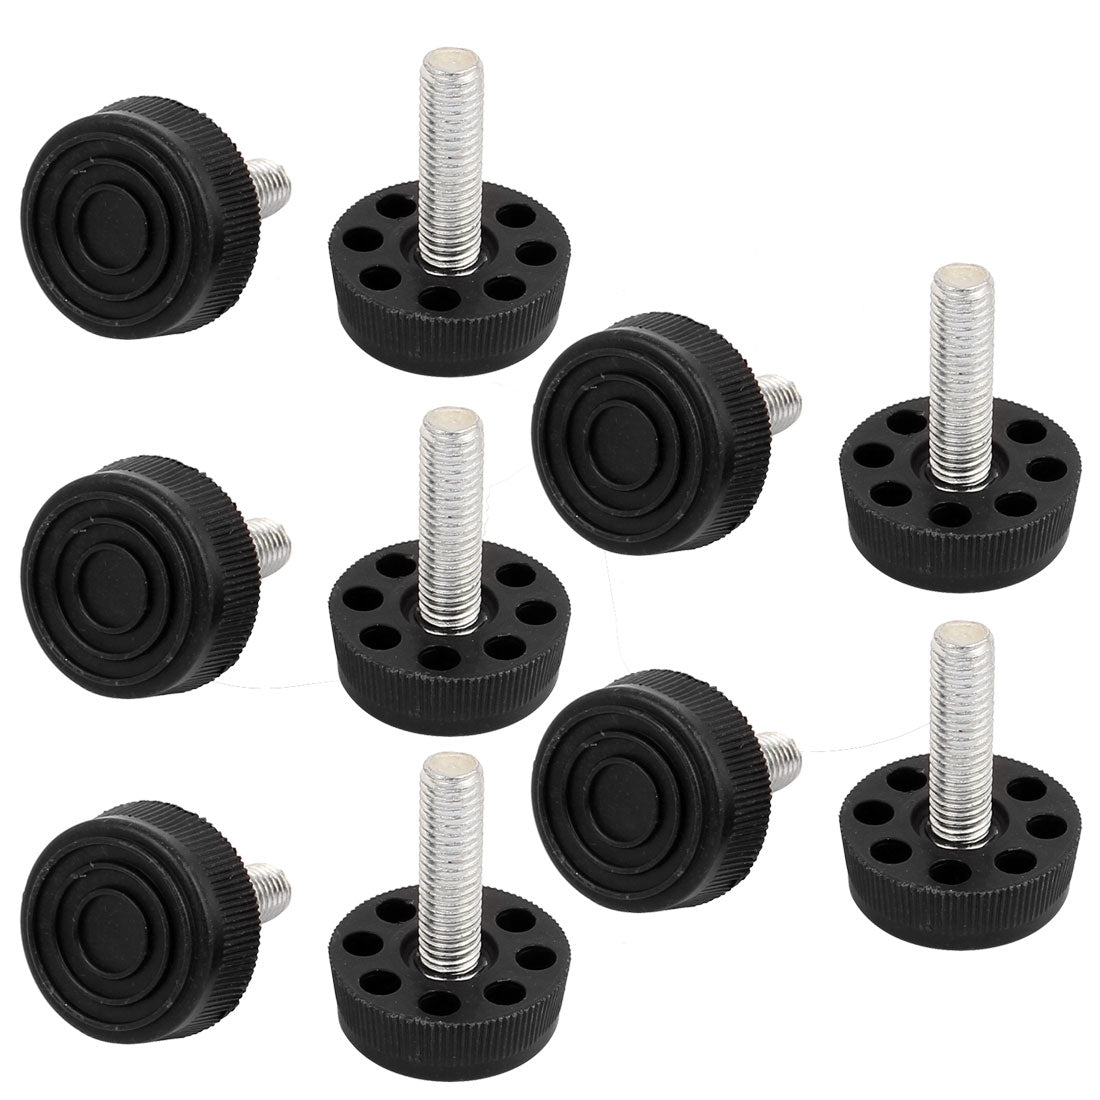 uxcell Uxcell M8 x 28mm Furniture Table 8 Holes Base Adjustable Leg Leveling Foot Black 10pcs